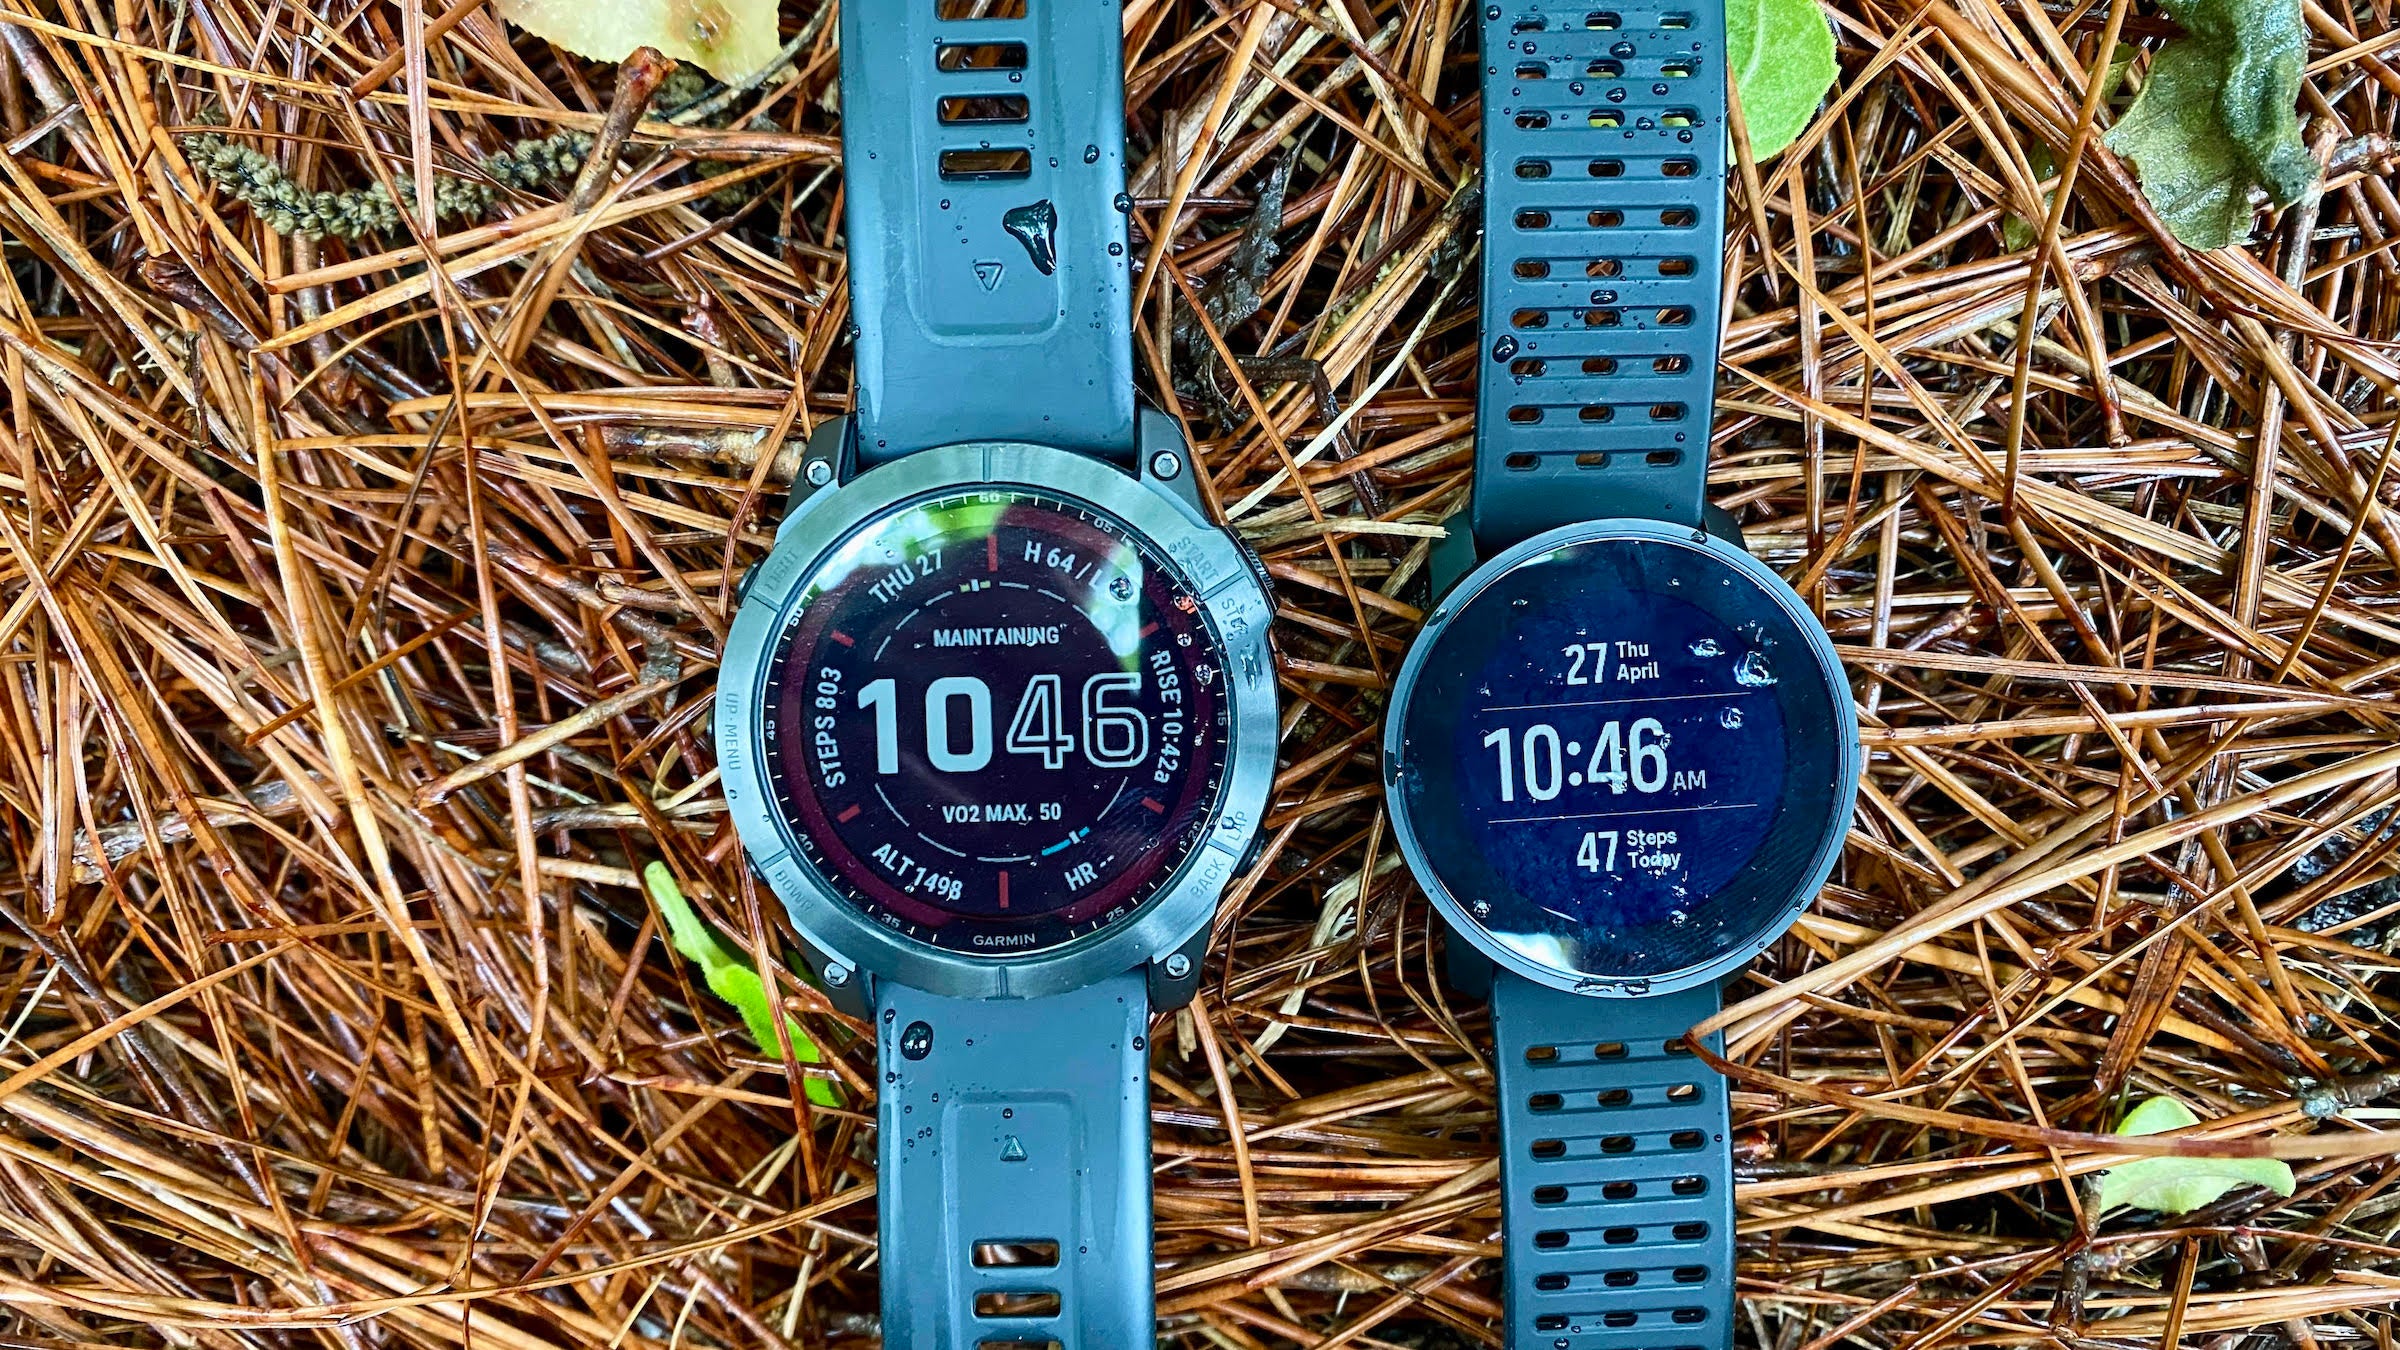 Ecg: Garmin brings ECG support to its smartwatches - Times of India